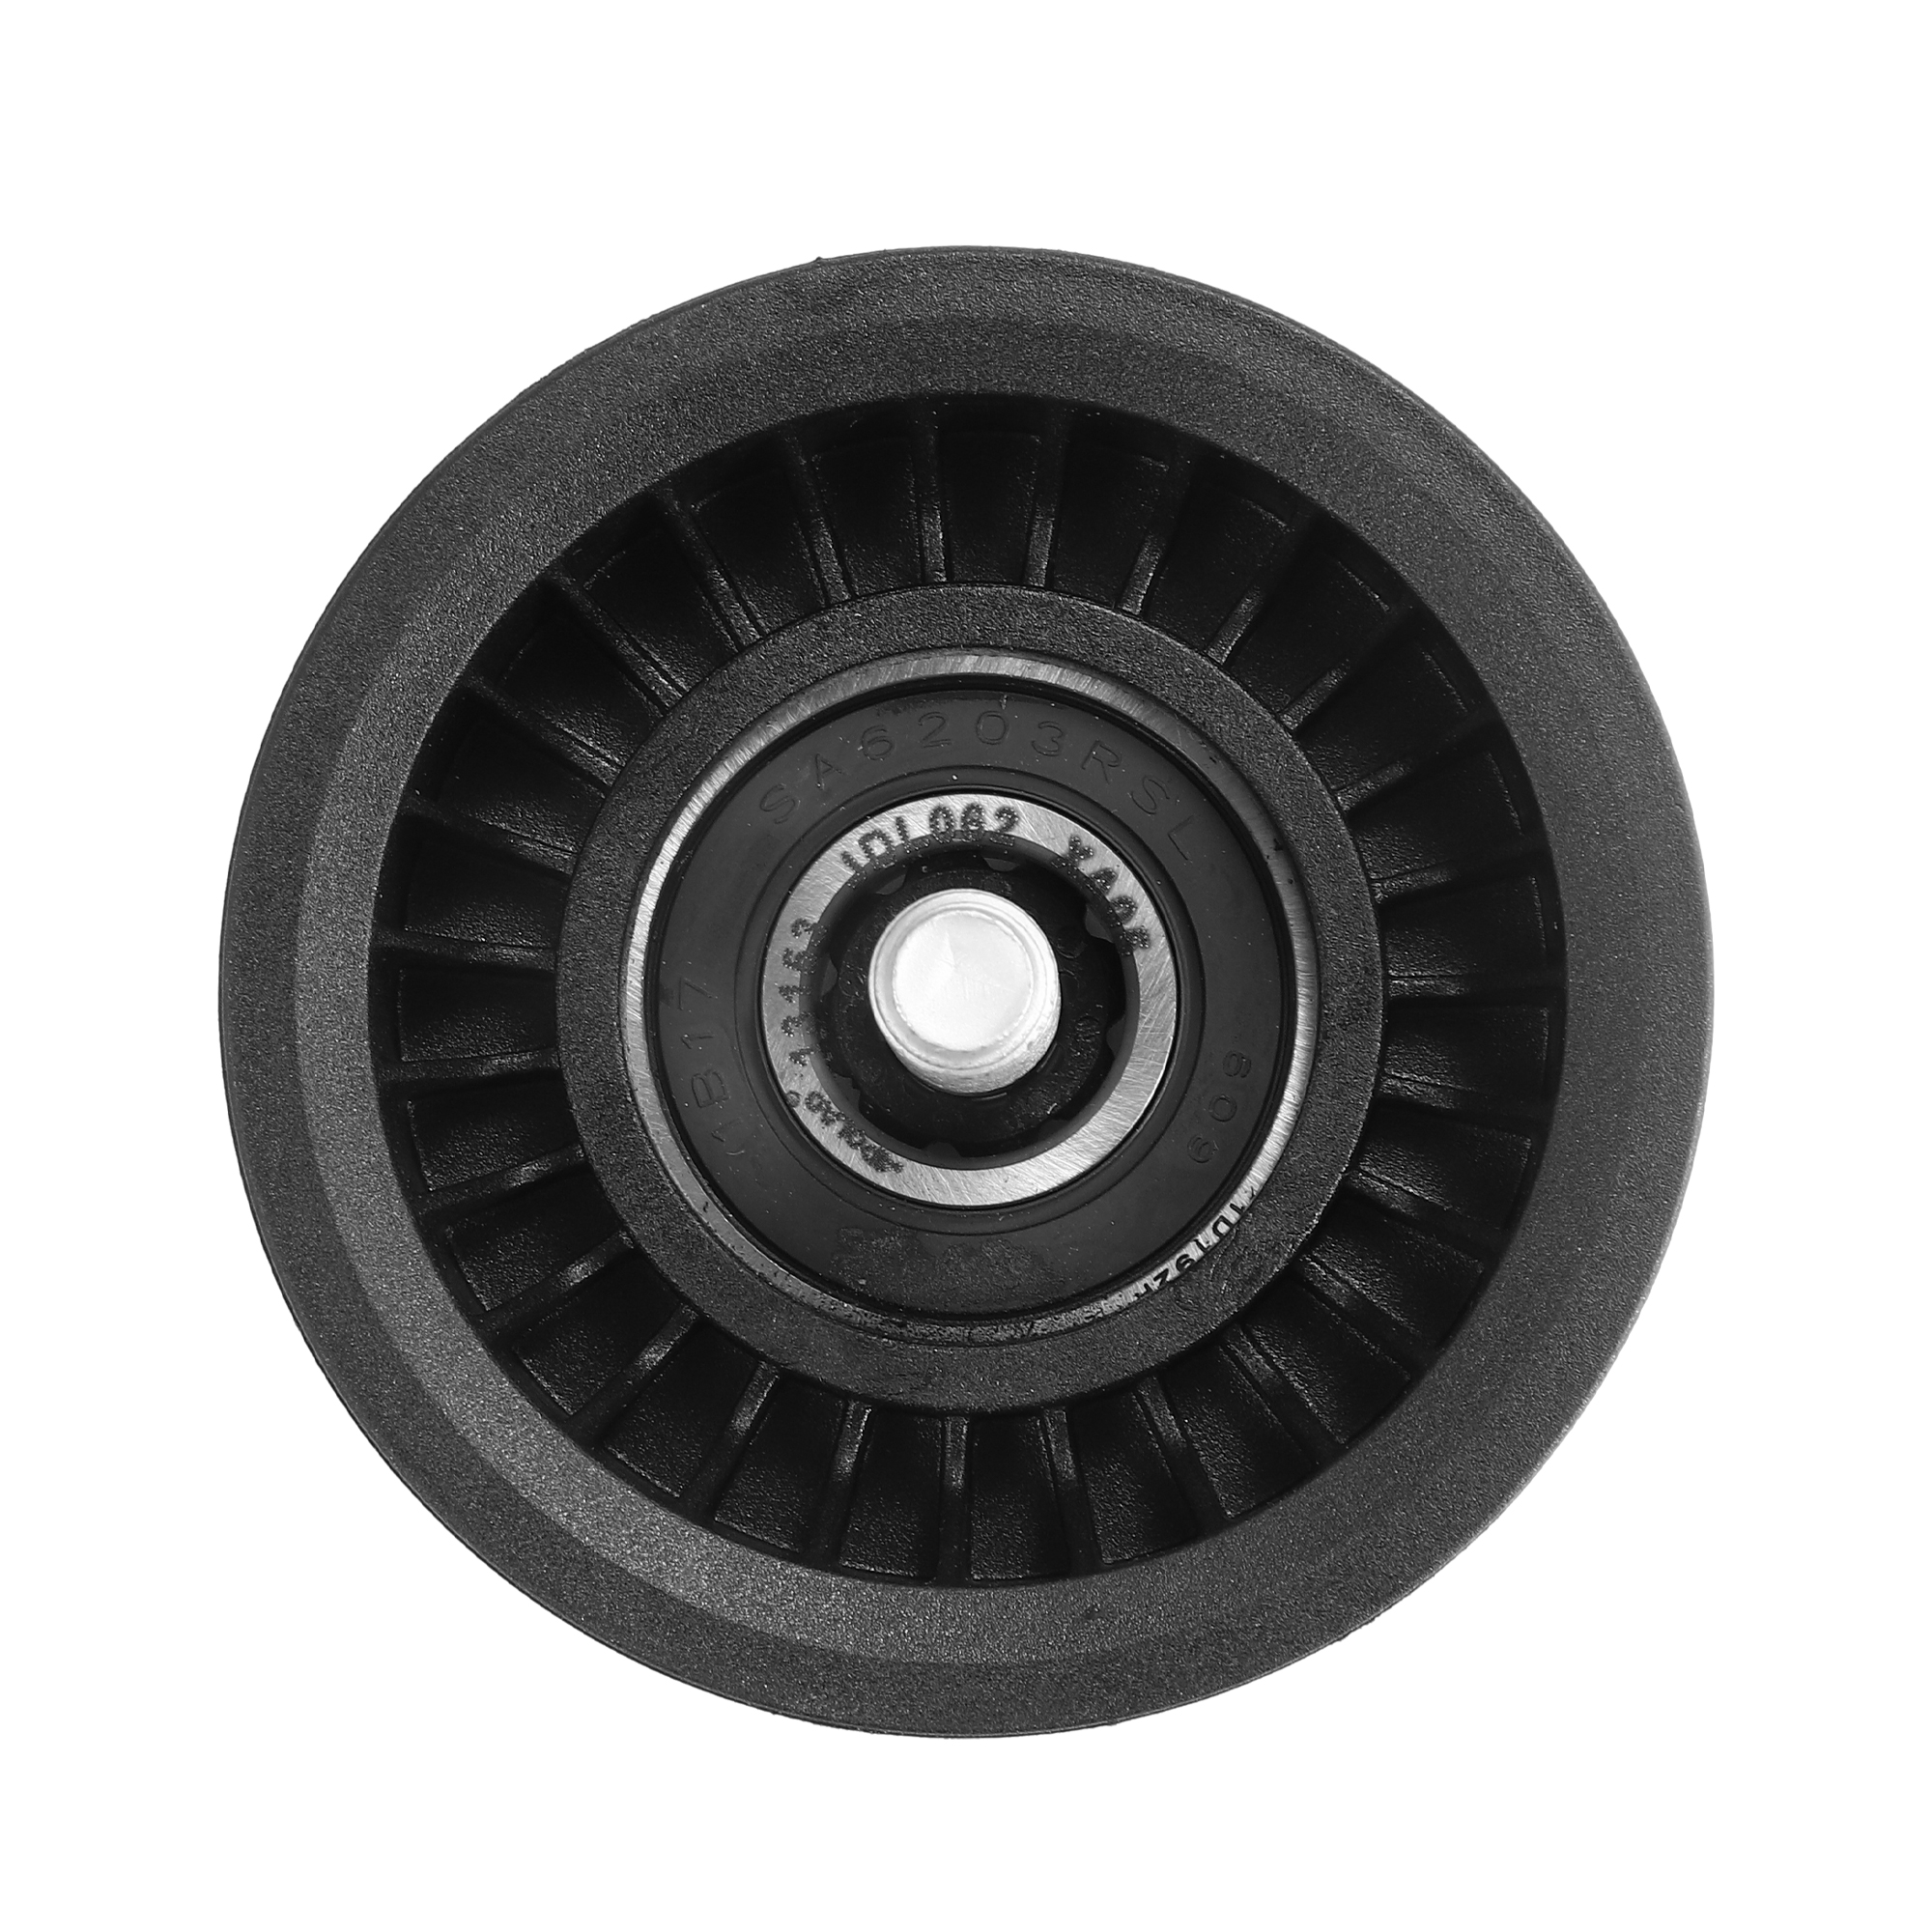 Unique Bargains LR035545 Engine Drive Belt Idler Pulley for Land Rover Range Rover Discovery